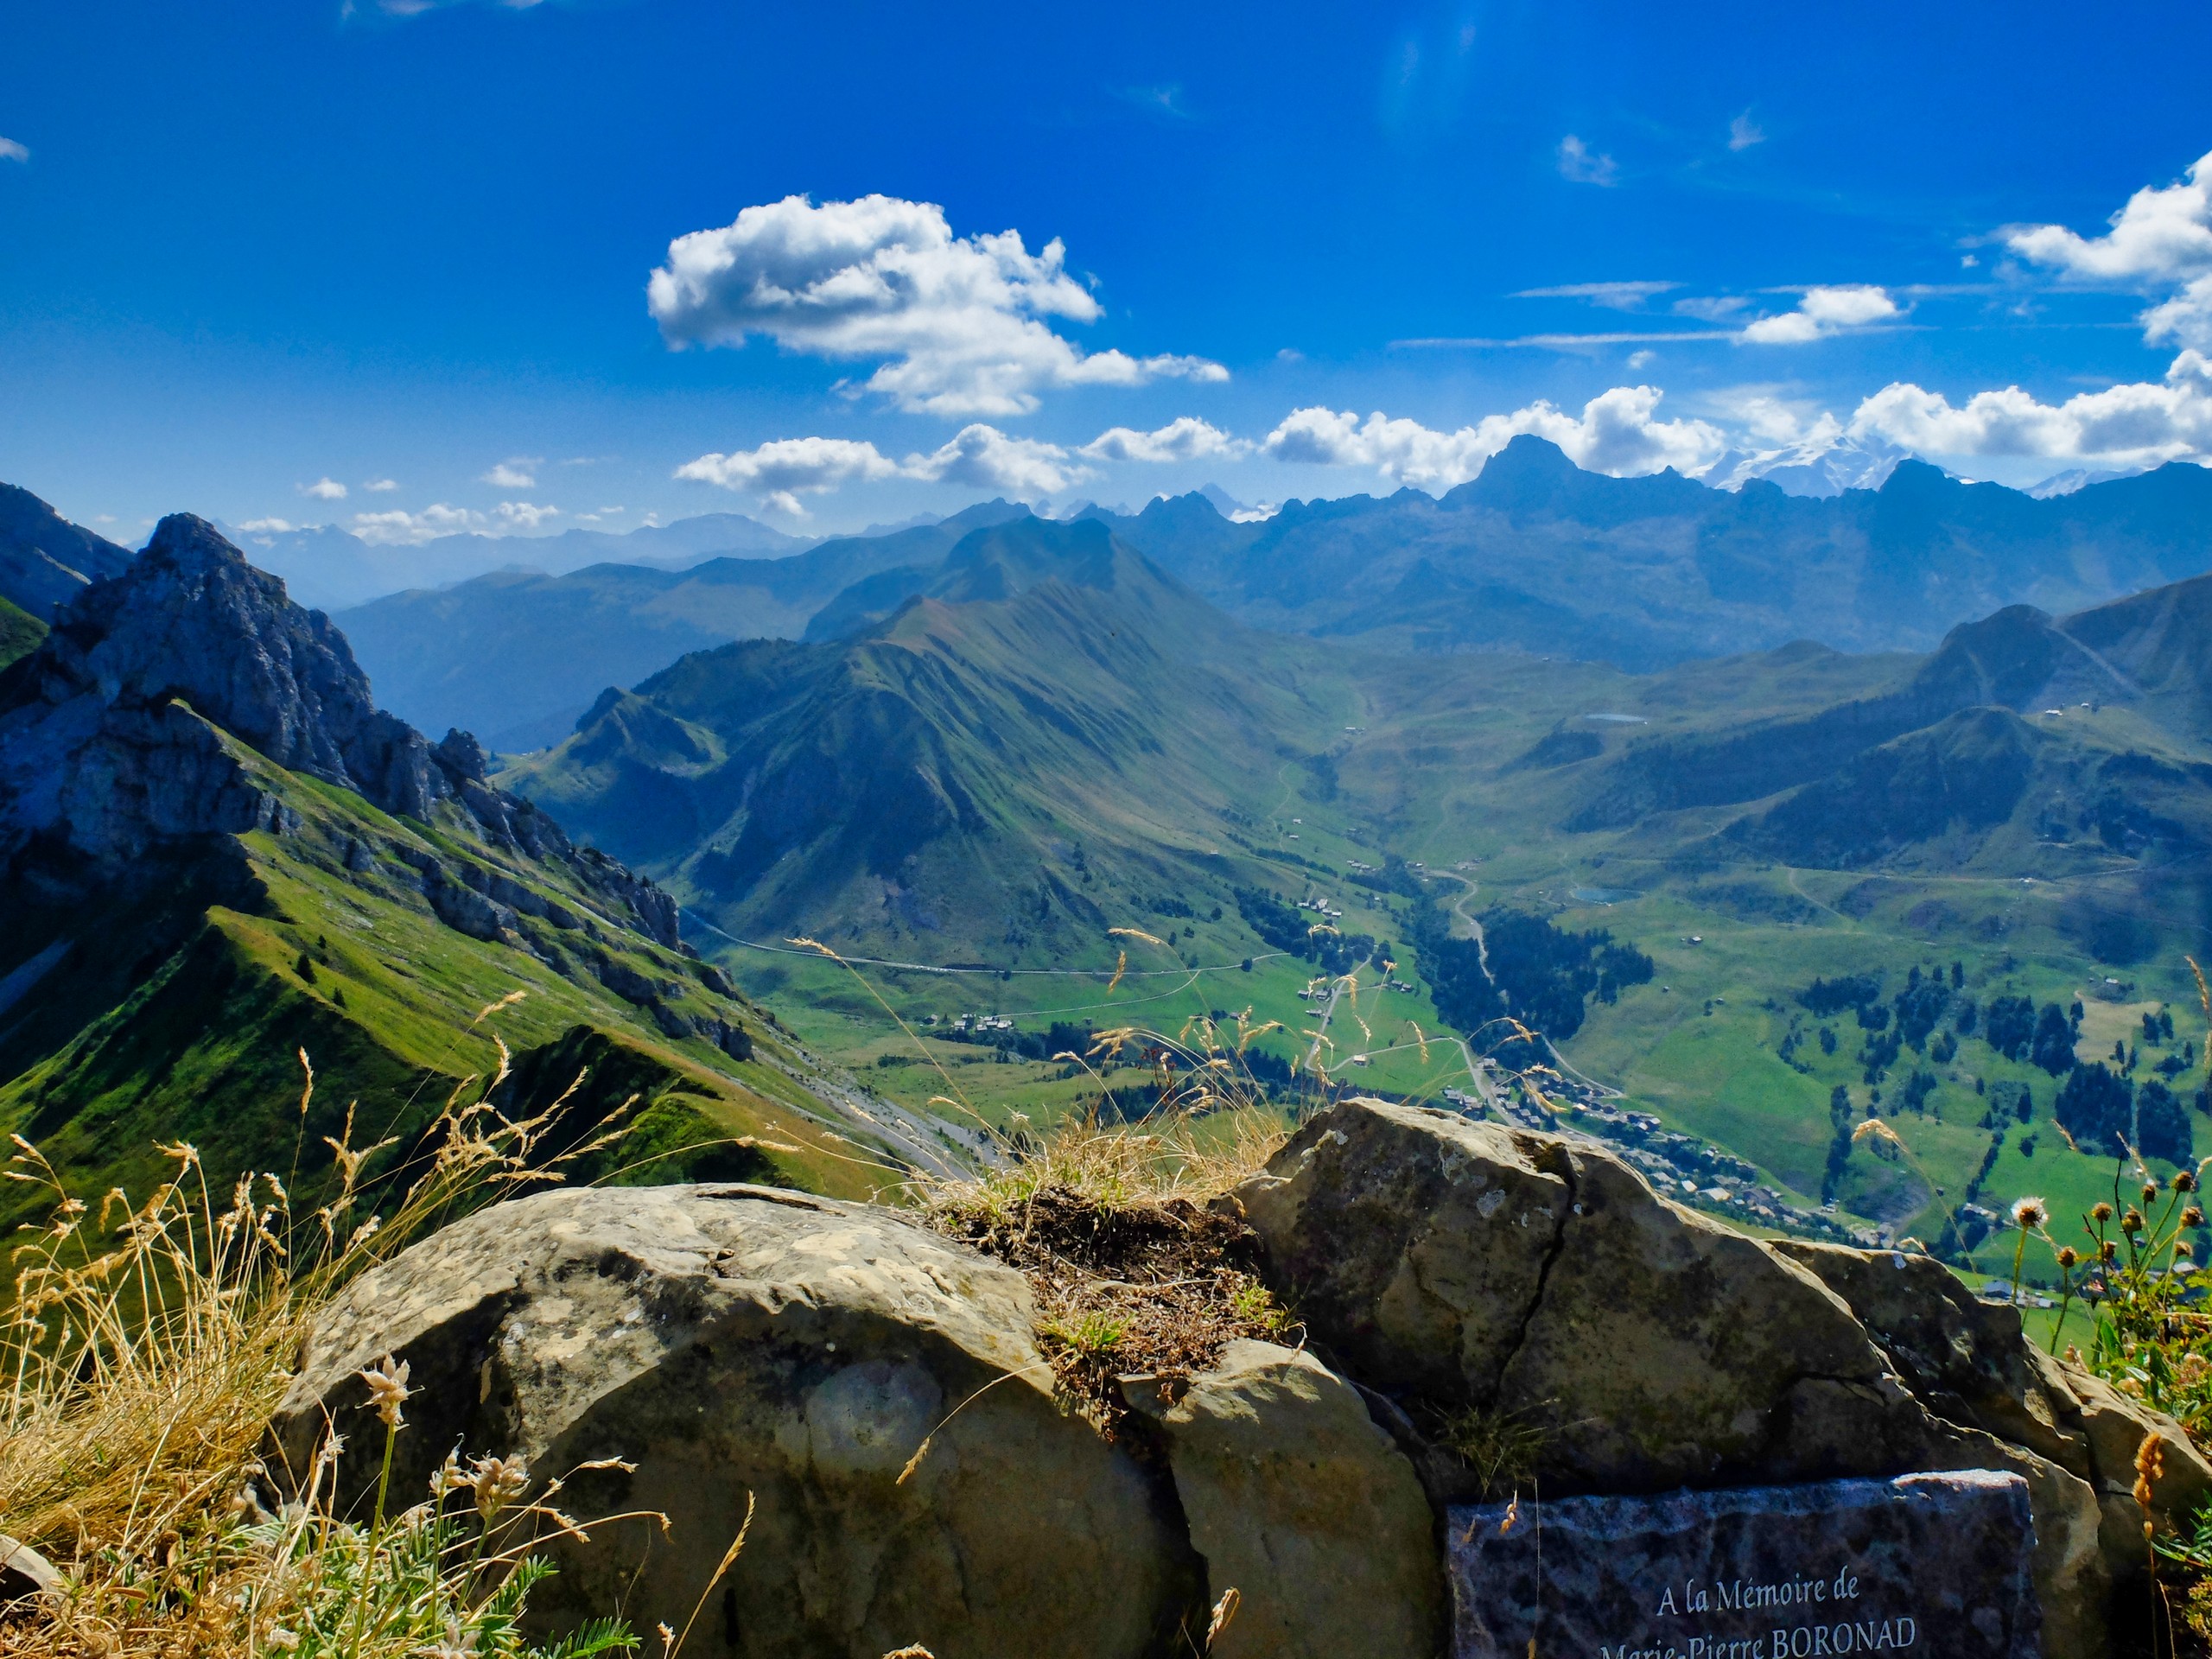 D4 - View from the top of the Aiguille Verte - Aravis - Alpes © Thomas Praire